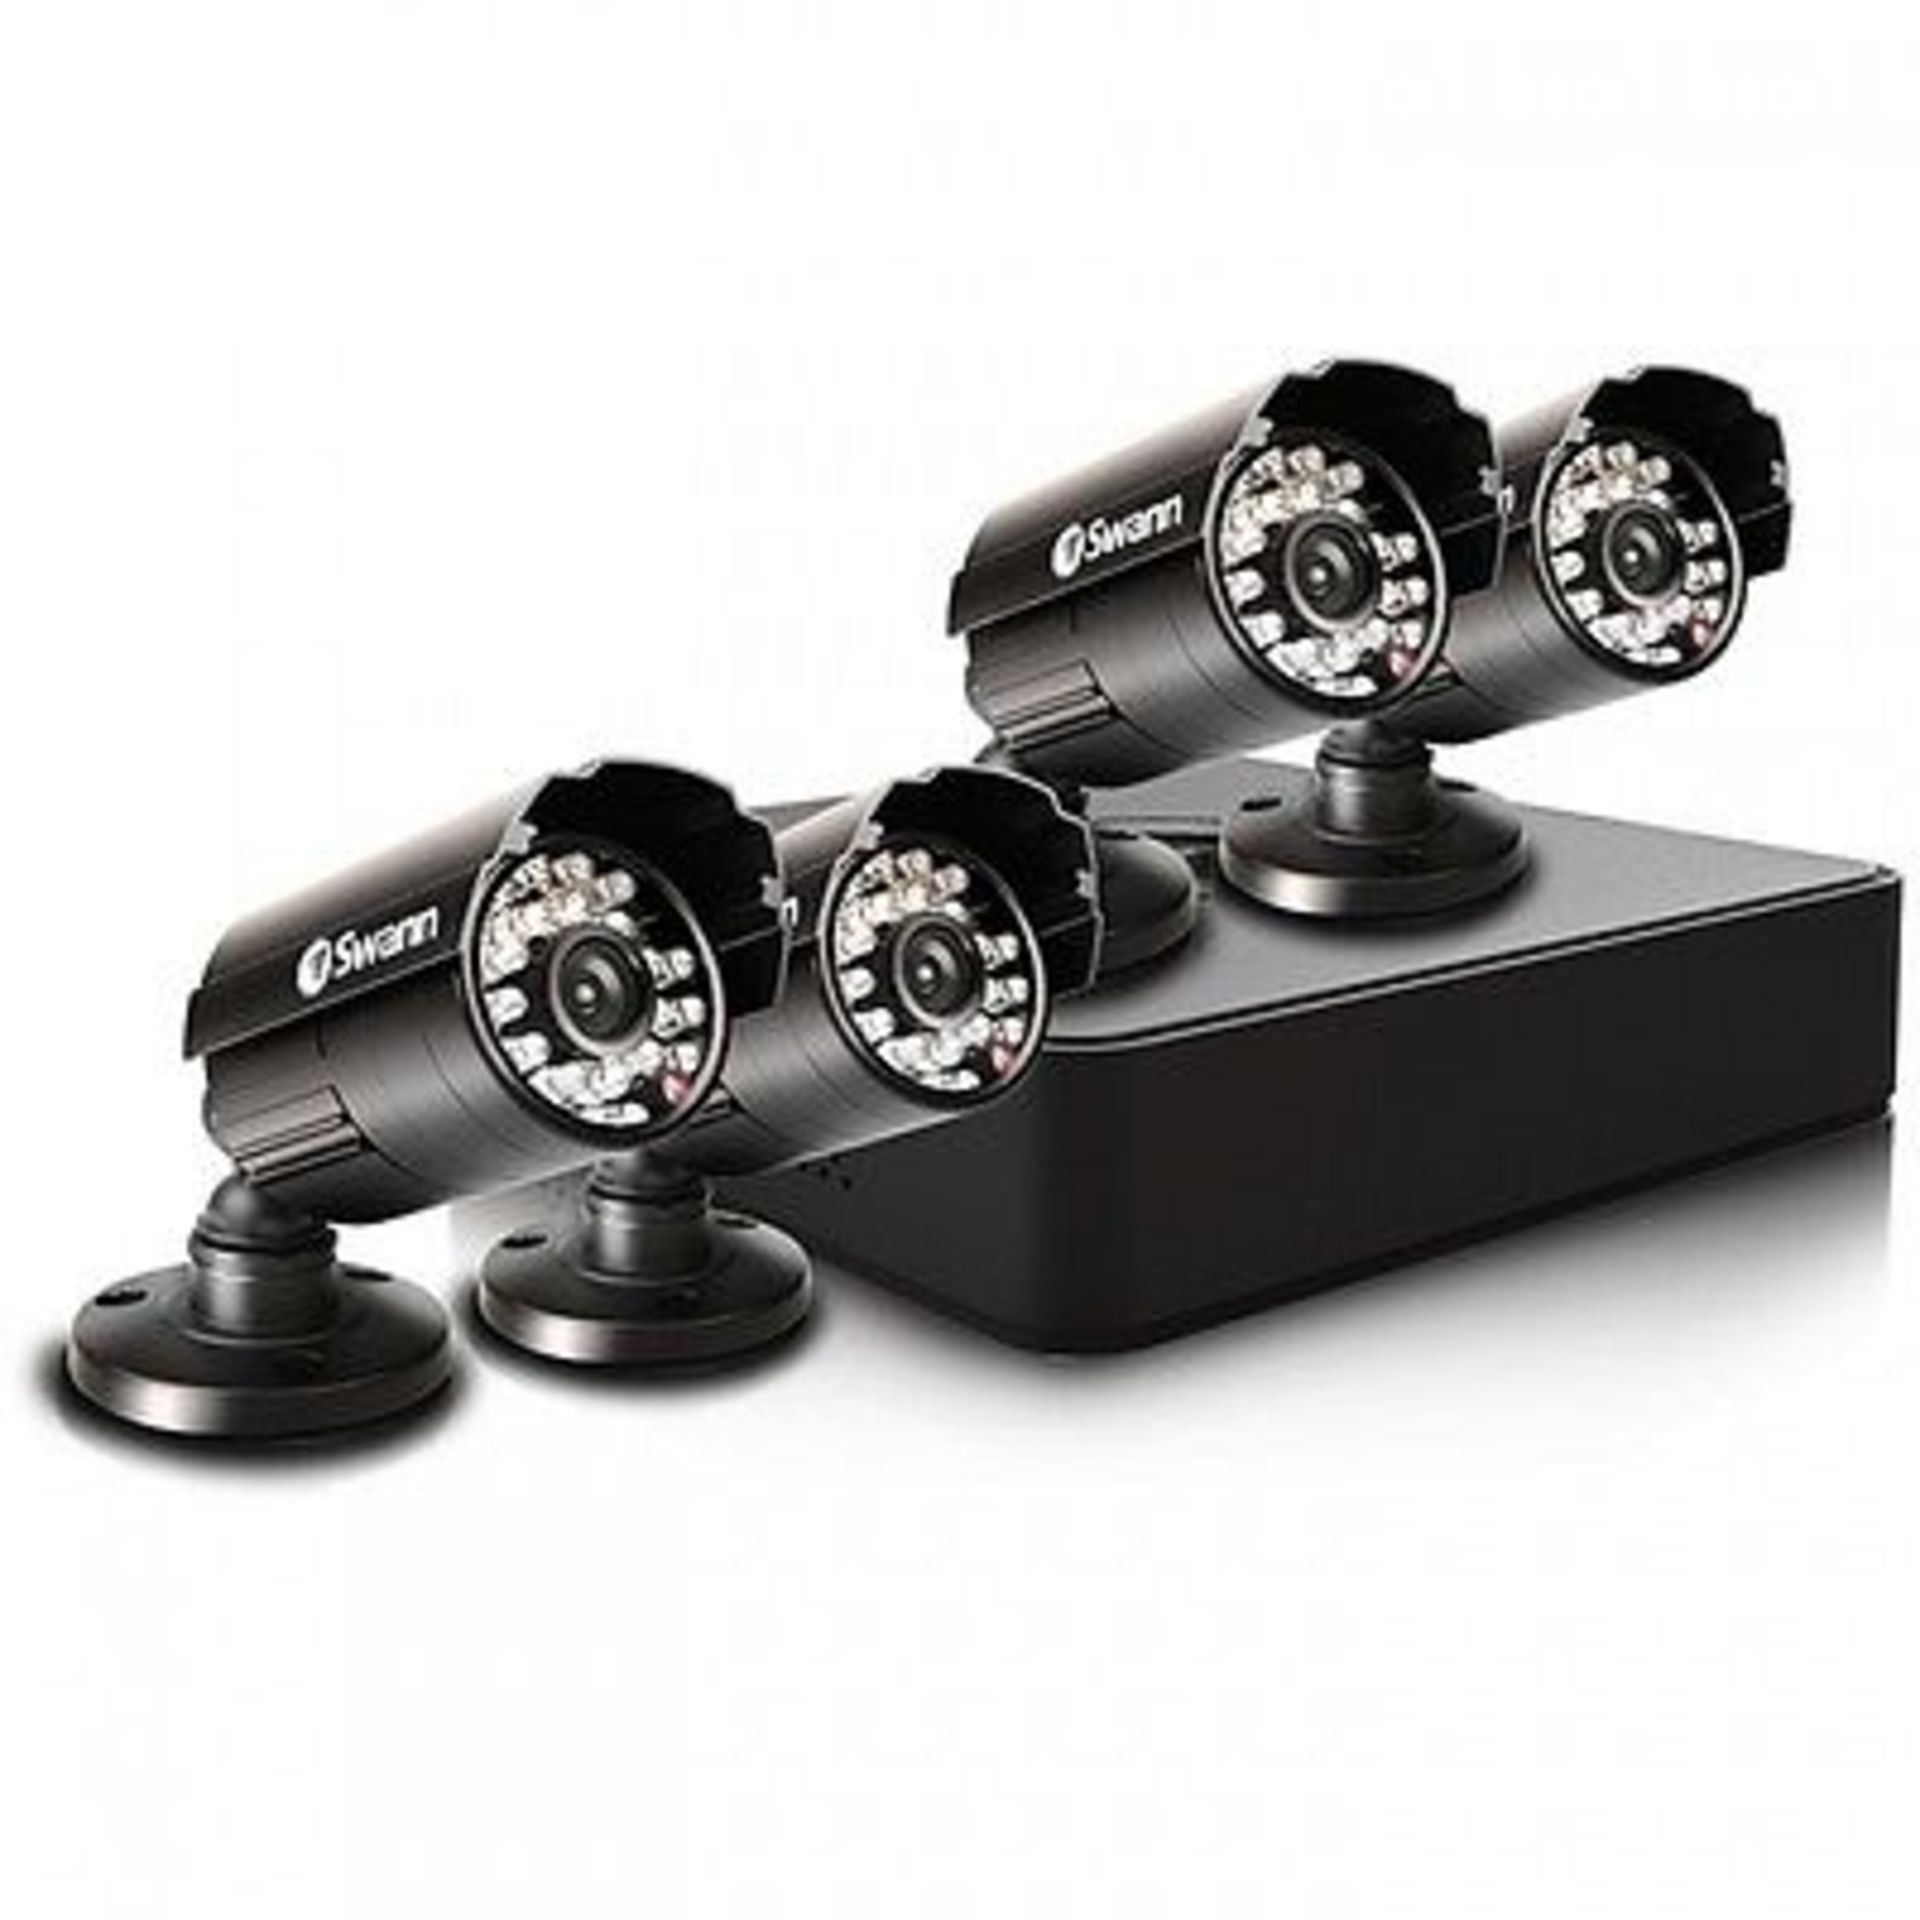 V Grade A Swann DVR8-1525 8 Channel 500gb 960h Dvr With 4 x PRO-615 Cameras - Motion Detection -